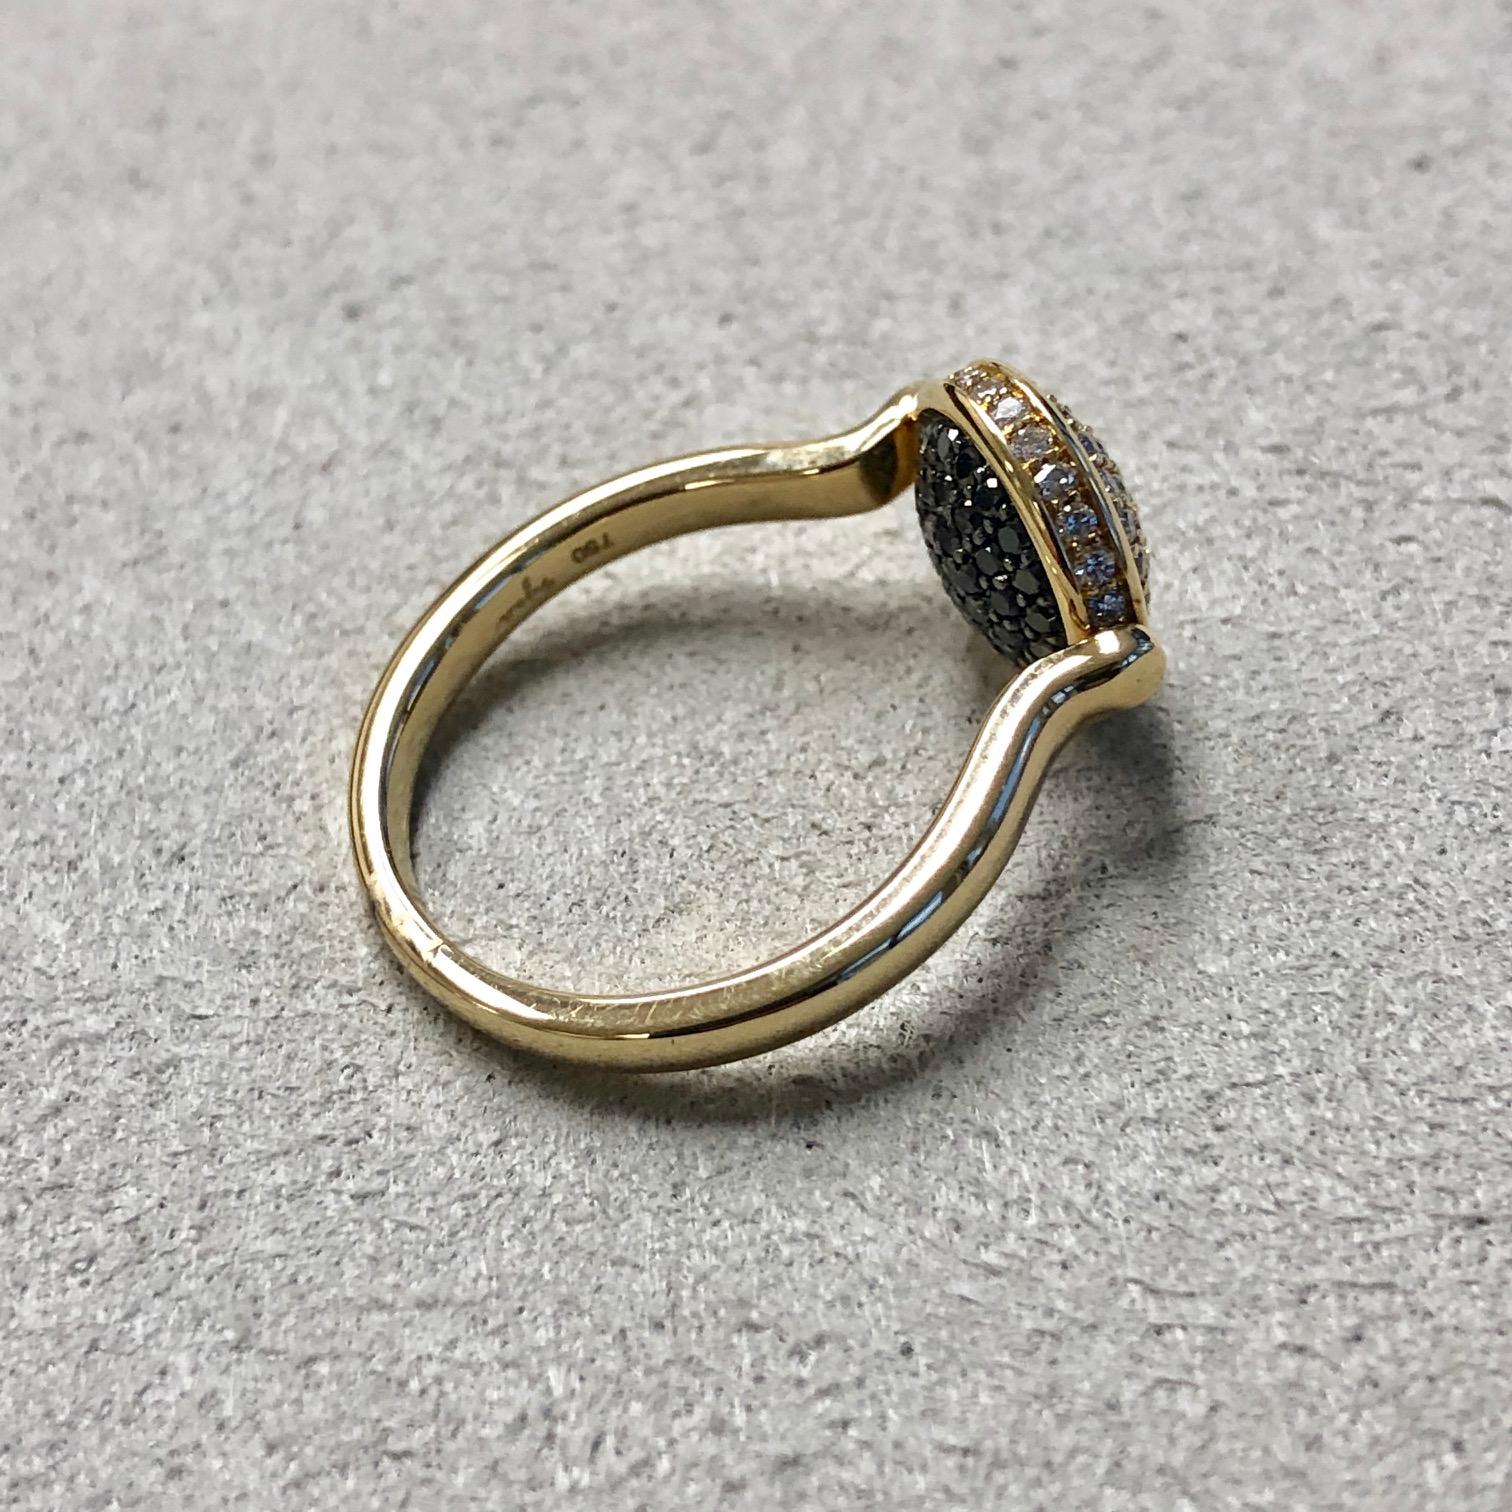 Created in 18 karat yellow gold 
Diamonds 0.35 cts approx
Black diamonds 0.25 cts approx
Reversible ring, can be worn in in both colors on a flip
Ring size US 6.5, can be sized up or down

Finely crafted in 18 karat yellow gold, this reversible ring